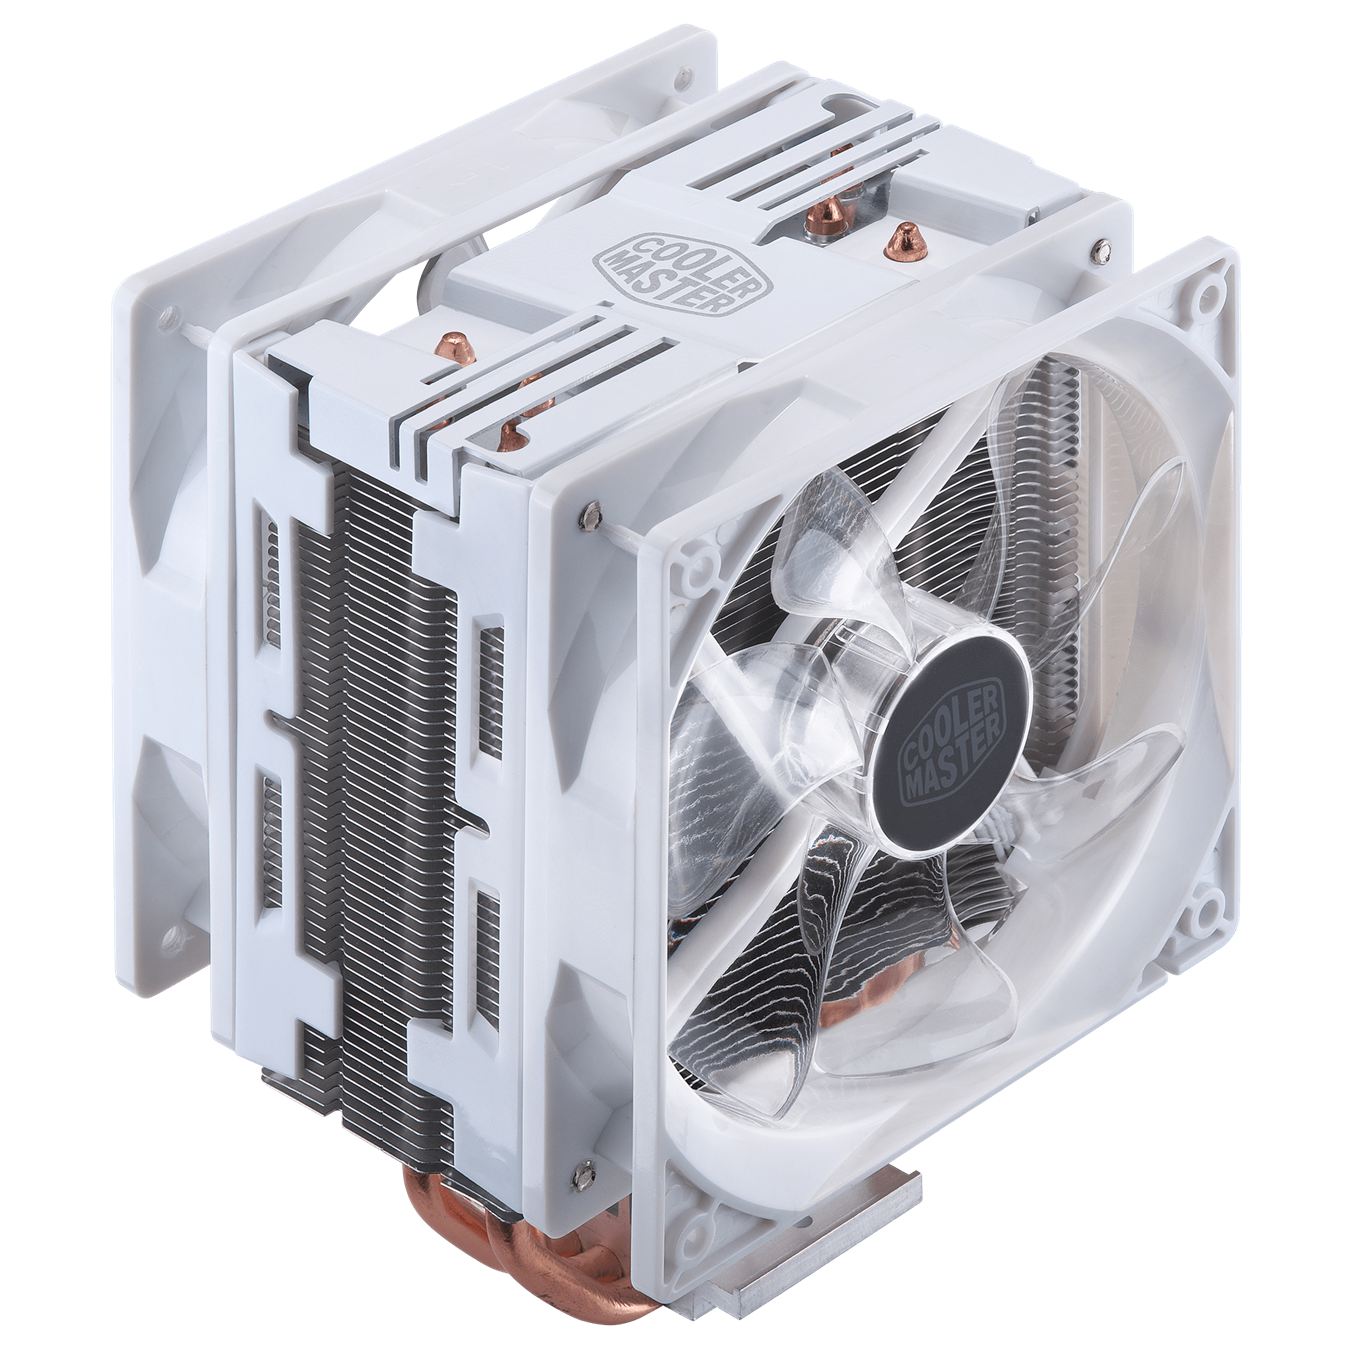 bar intelligence Power cell Hyper 212 LED Turbo White Edition CPU Air Cooler | Cooler Master